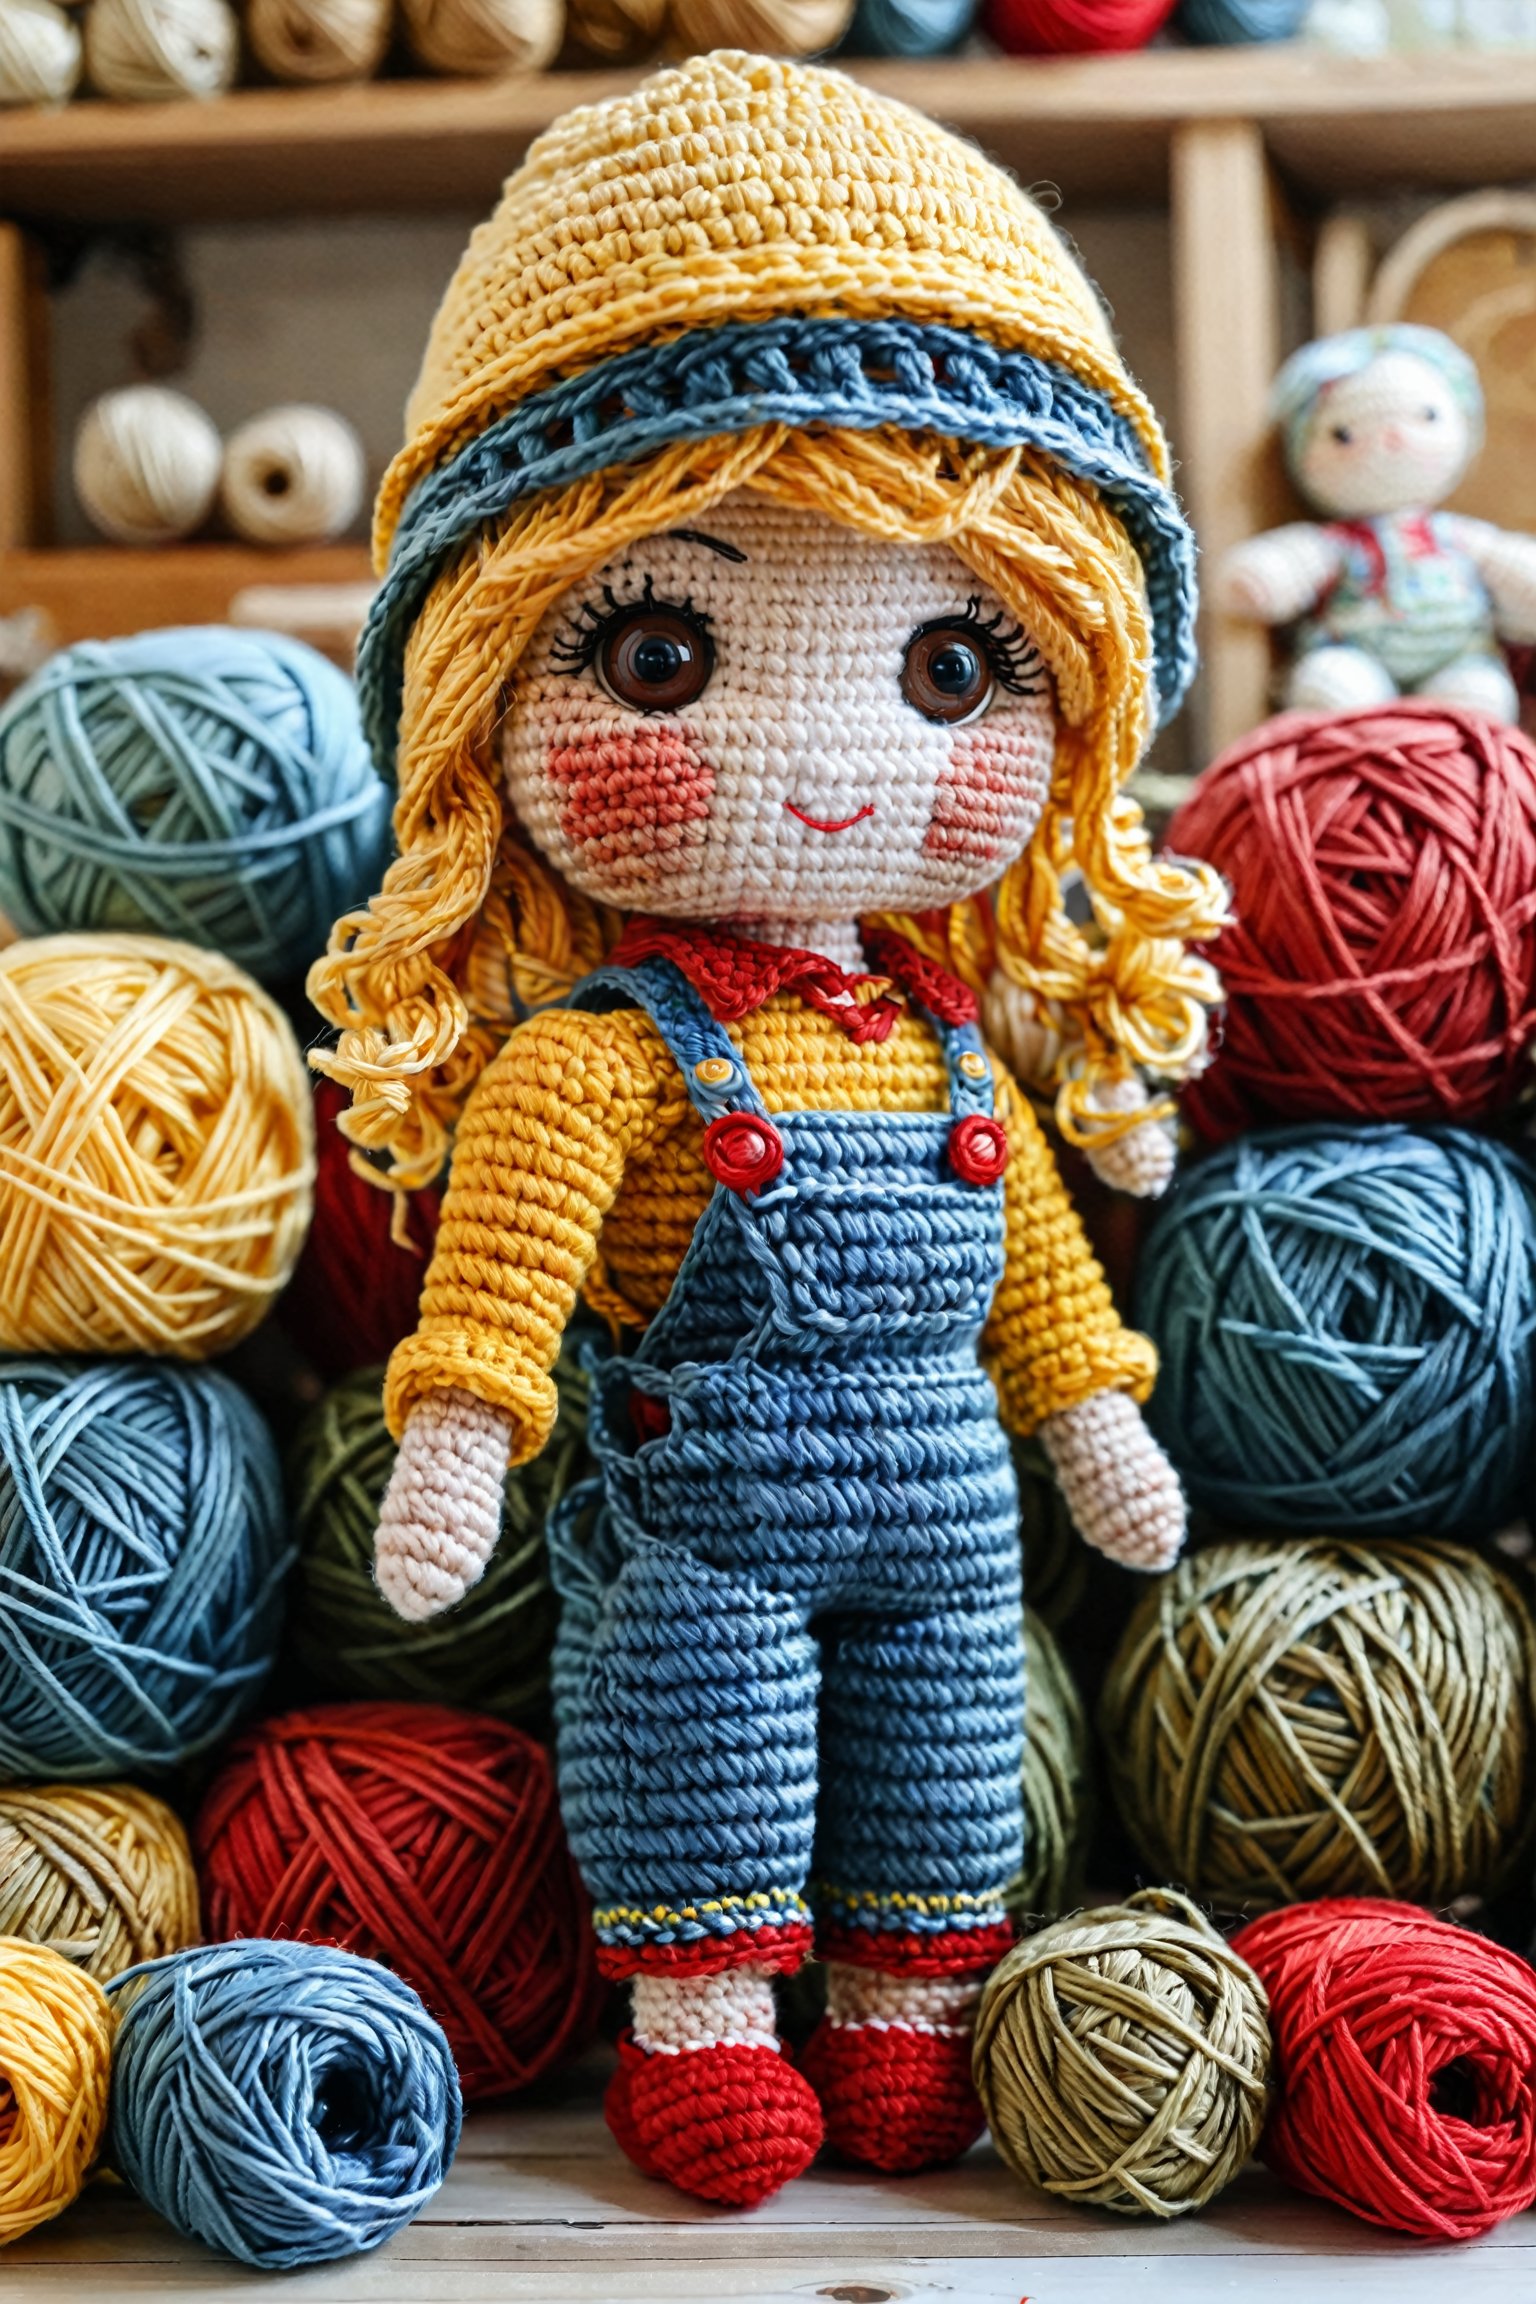 A handcrafted crochet doll, adorned in a yellow hat, red shirt, and blue overalls. The doll is positioned in the foreground, surrounded by various colored yarns in the background. The yarns are neatly arranged, with some in balls and others in skeins. The overall setting suggests a crafting or hobbyist environment.